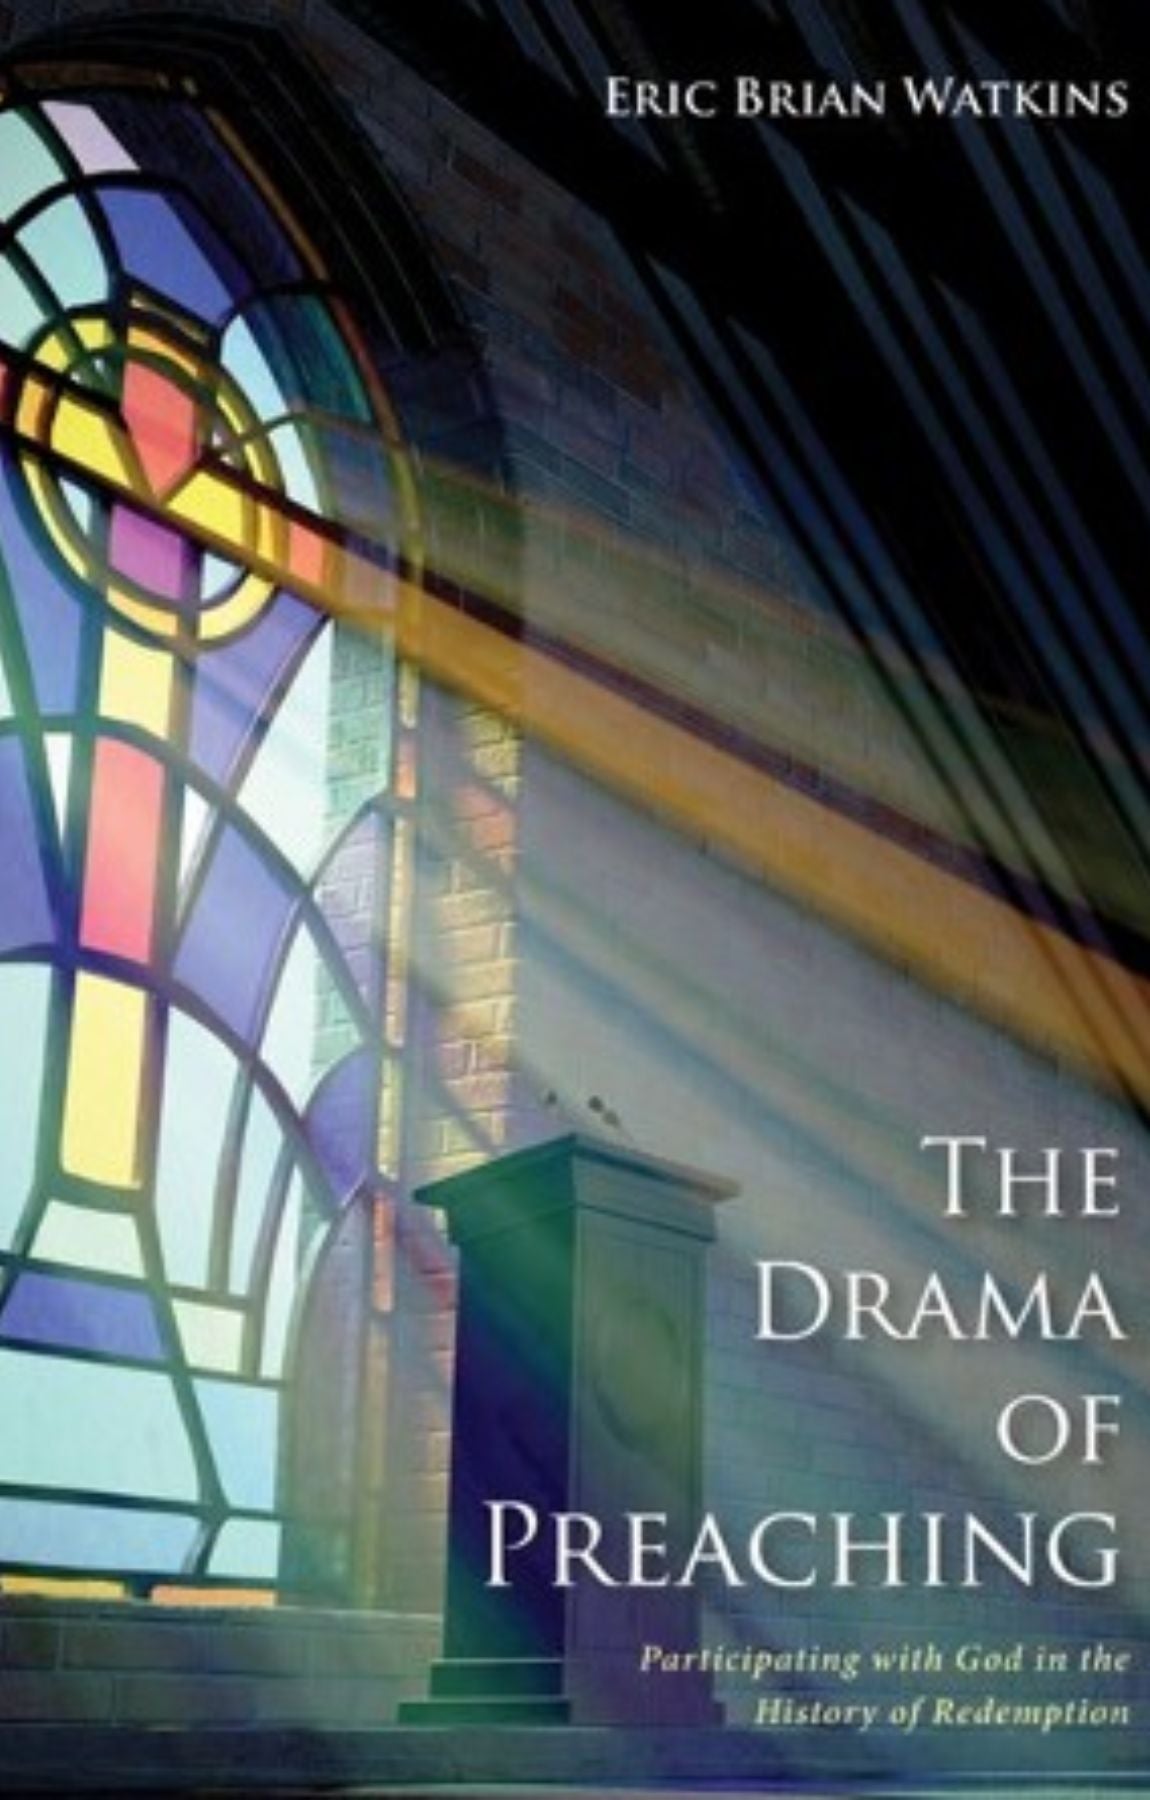 The Drama of Preaching: Participating with God in the History of Redemption